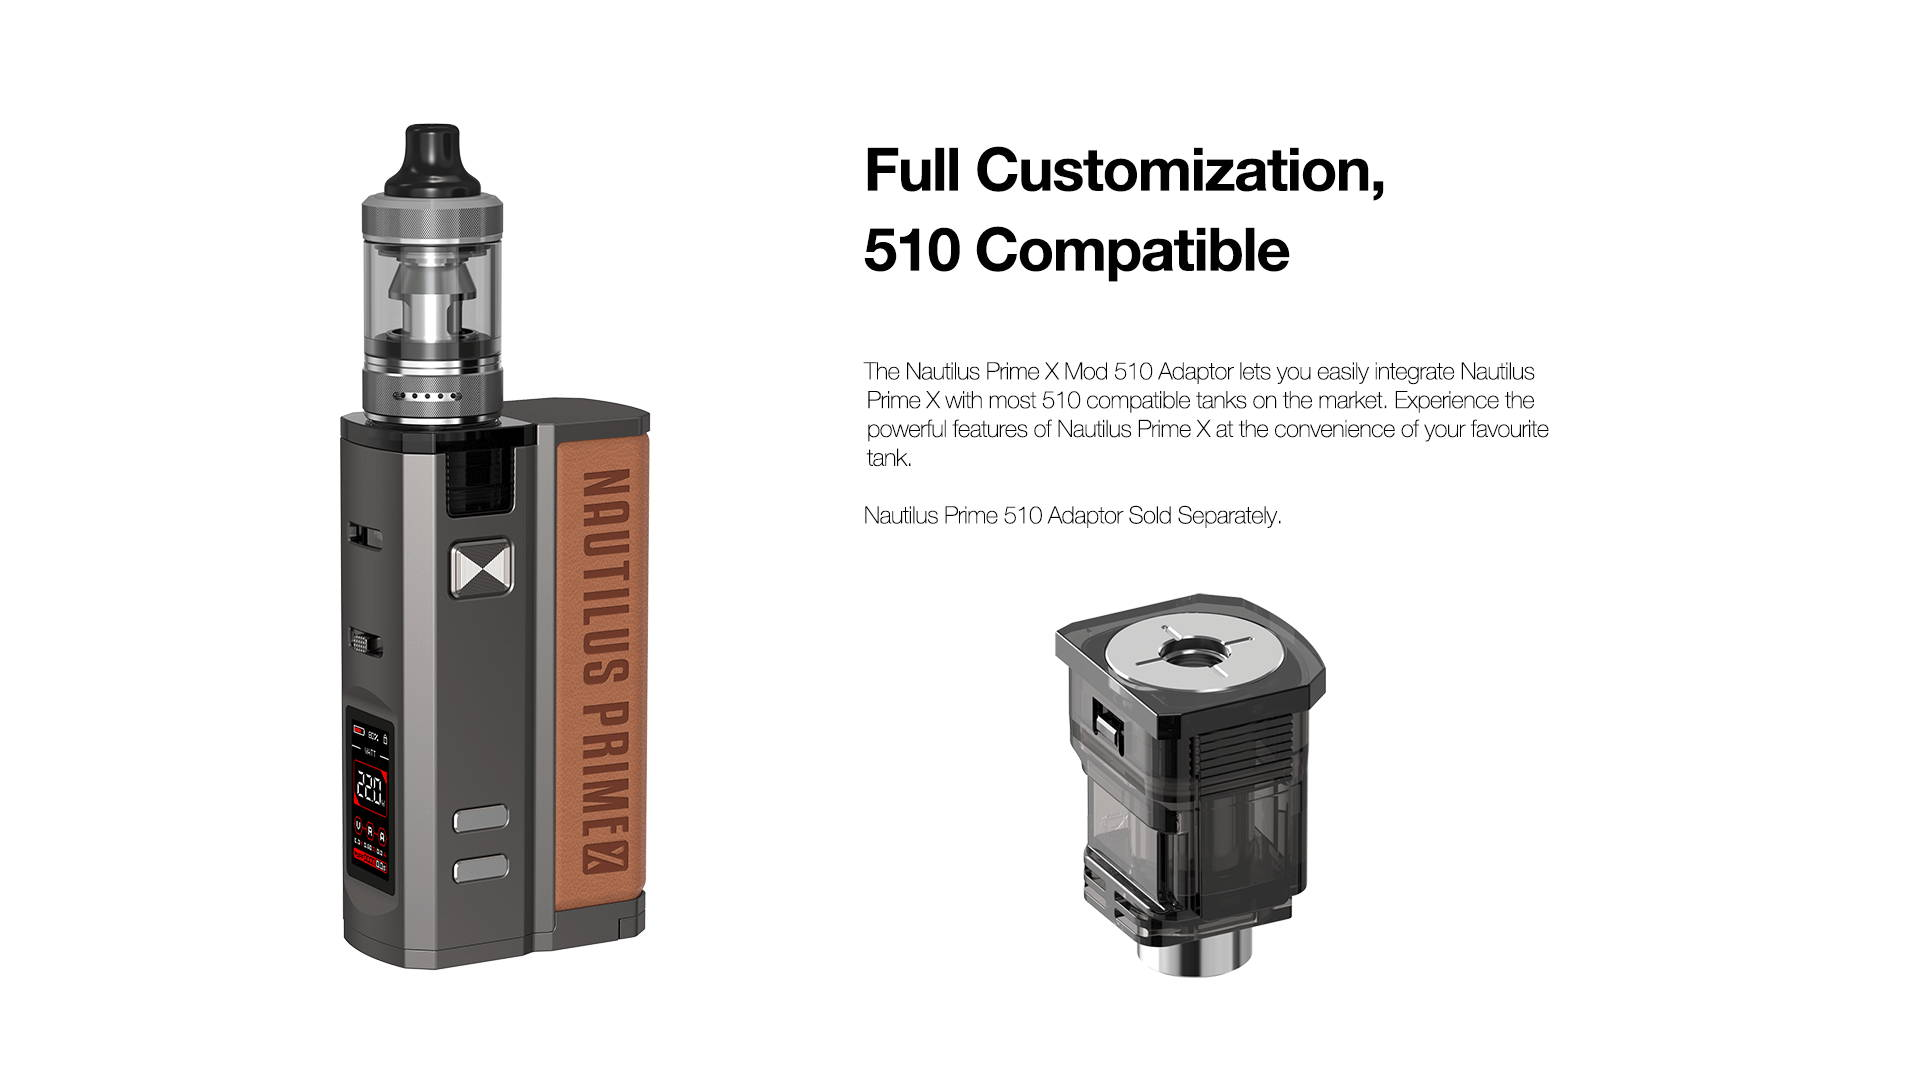 Full Customization, 510 Compatible Mod  The Nautilus Prime X Mod 510 Adaptor lets you easily integrate Nautilus Prime X with most 510 compatible tank in the market. Experience the powerful features of Nautilus Prime X at the convenience of your favourite tank.